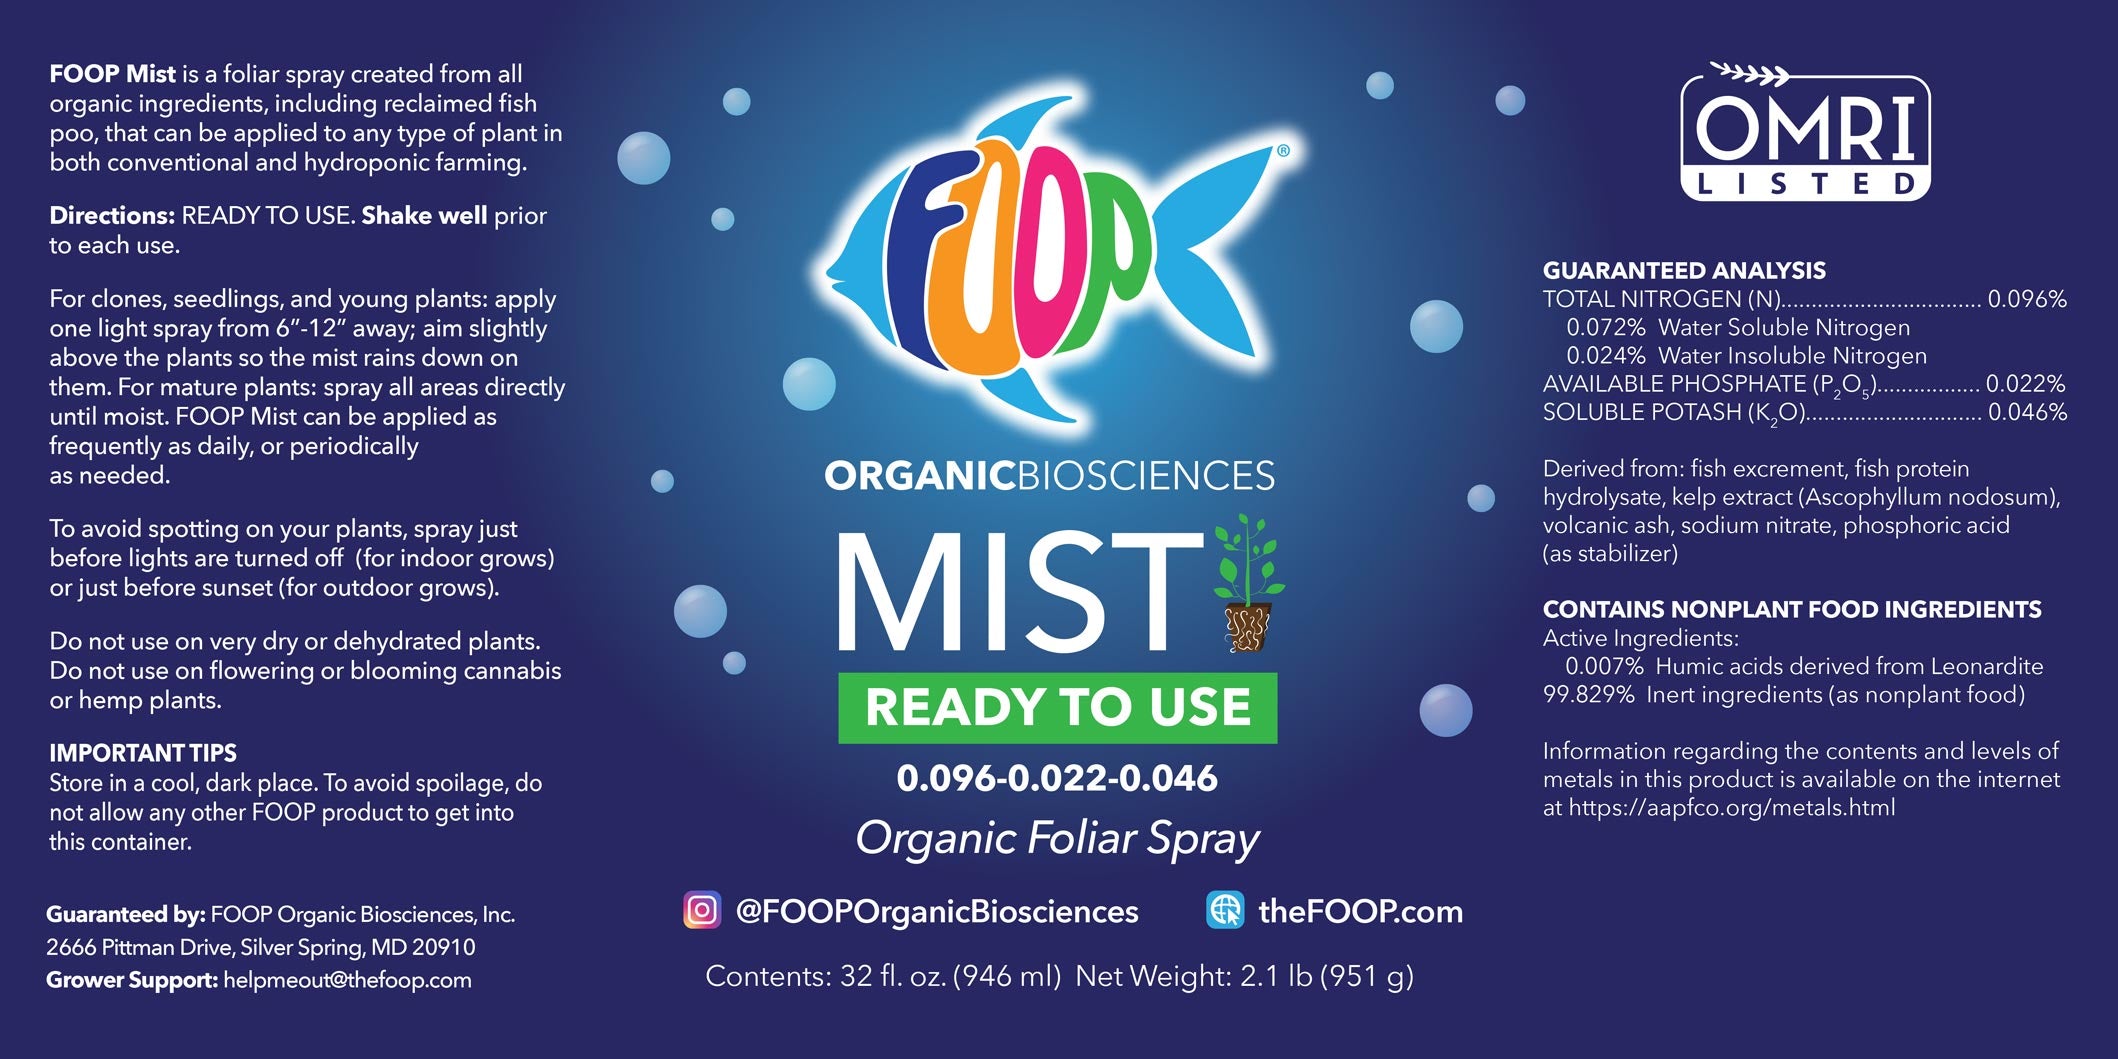 FOOP Mist Ready to Use Label